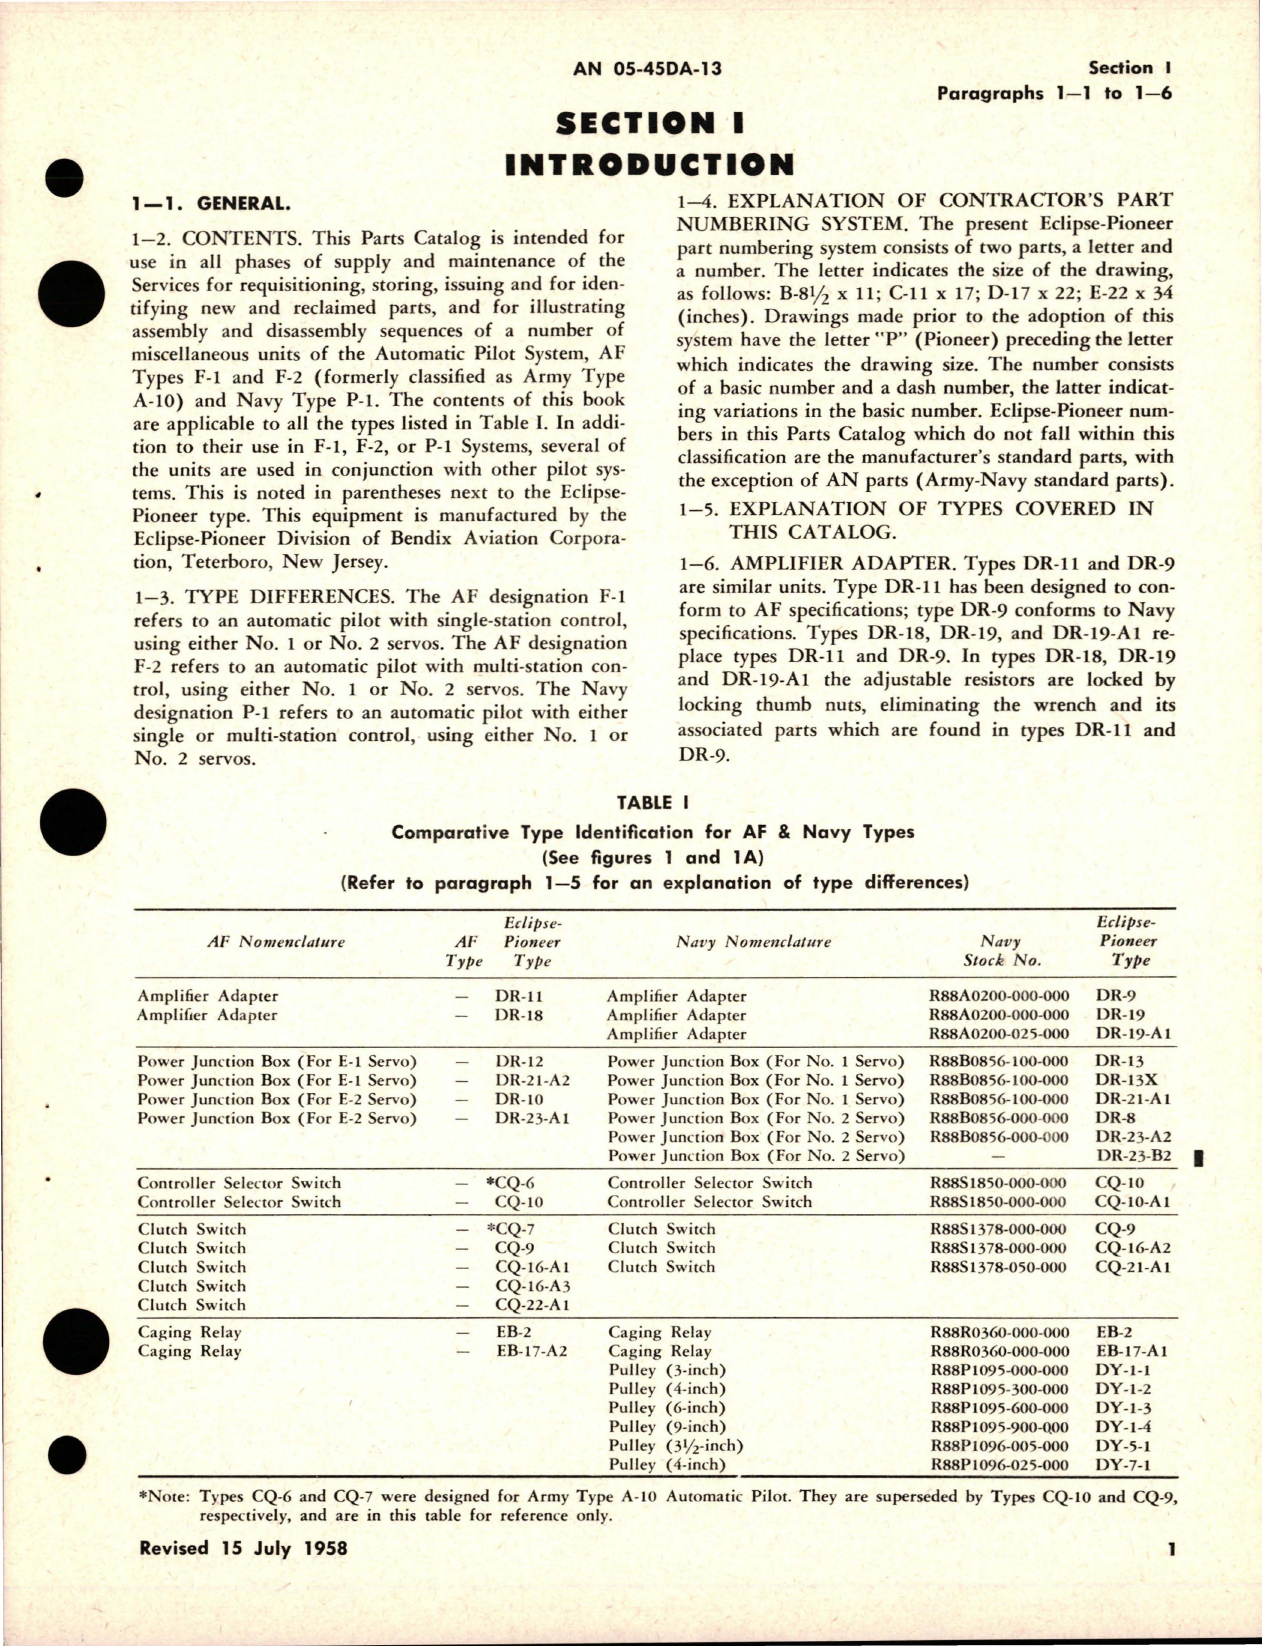 Sample page 7 from AirCorps Library document: Parts Catalog for Amplifier Adapter, Power Junction Box, Control Selector & Clutch Switch, Caging Relay and Pulley